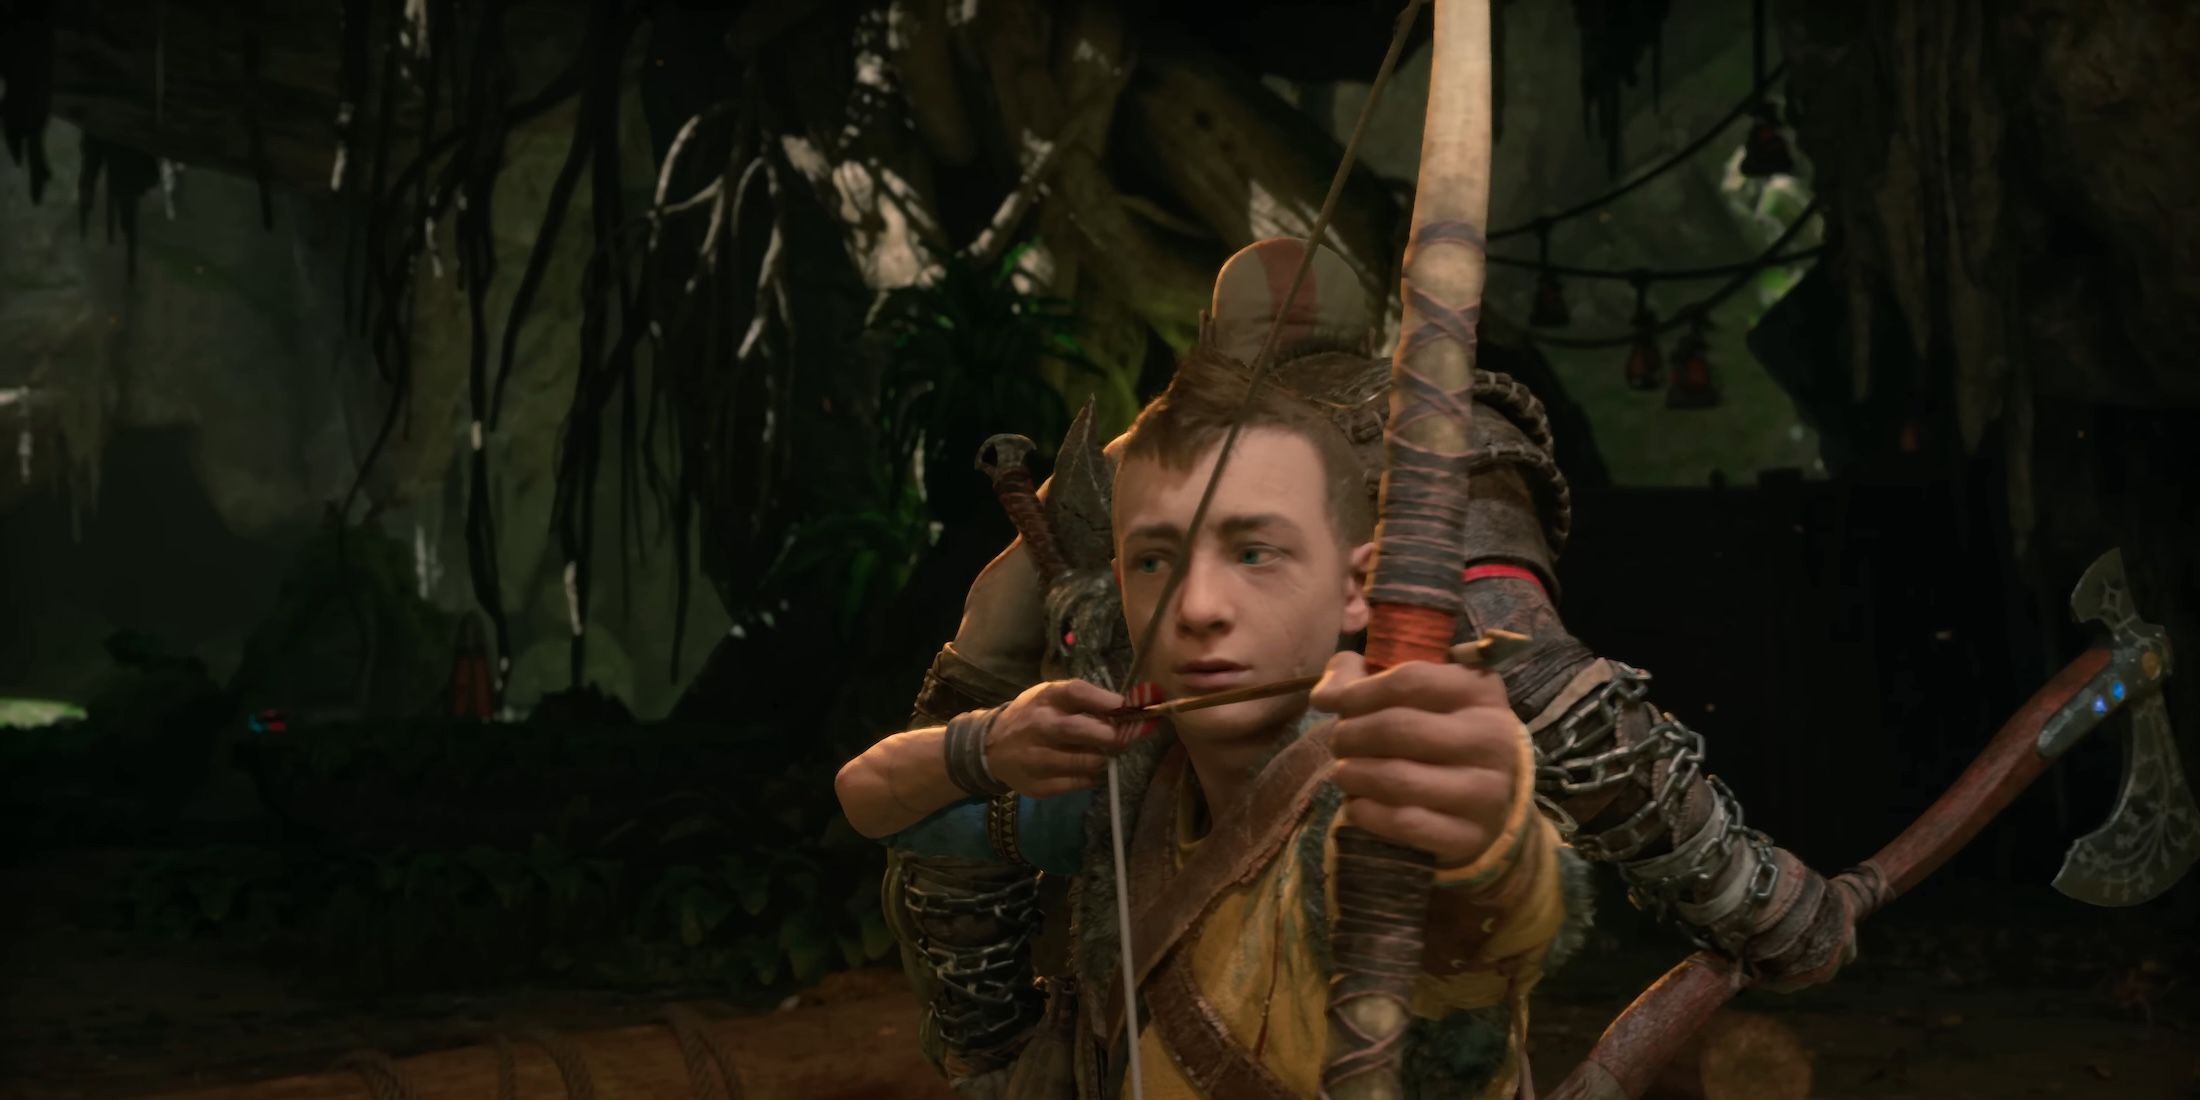 An Atreus God of War game could take a “less is more” approach to companions